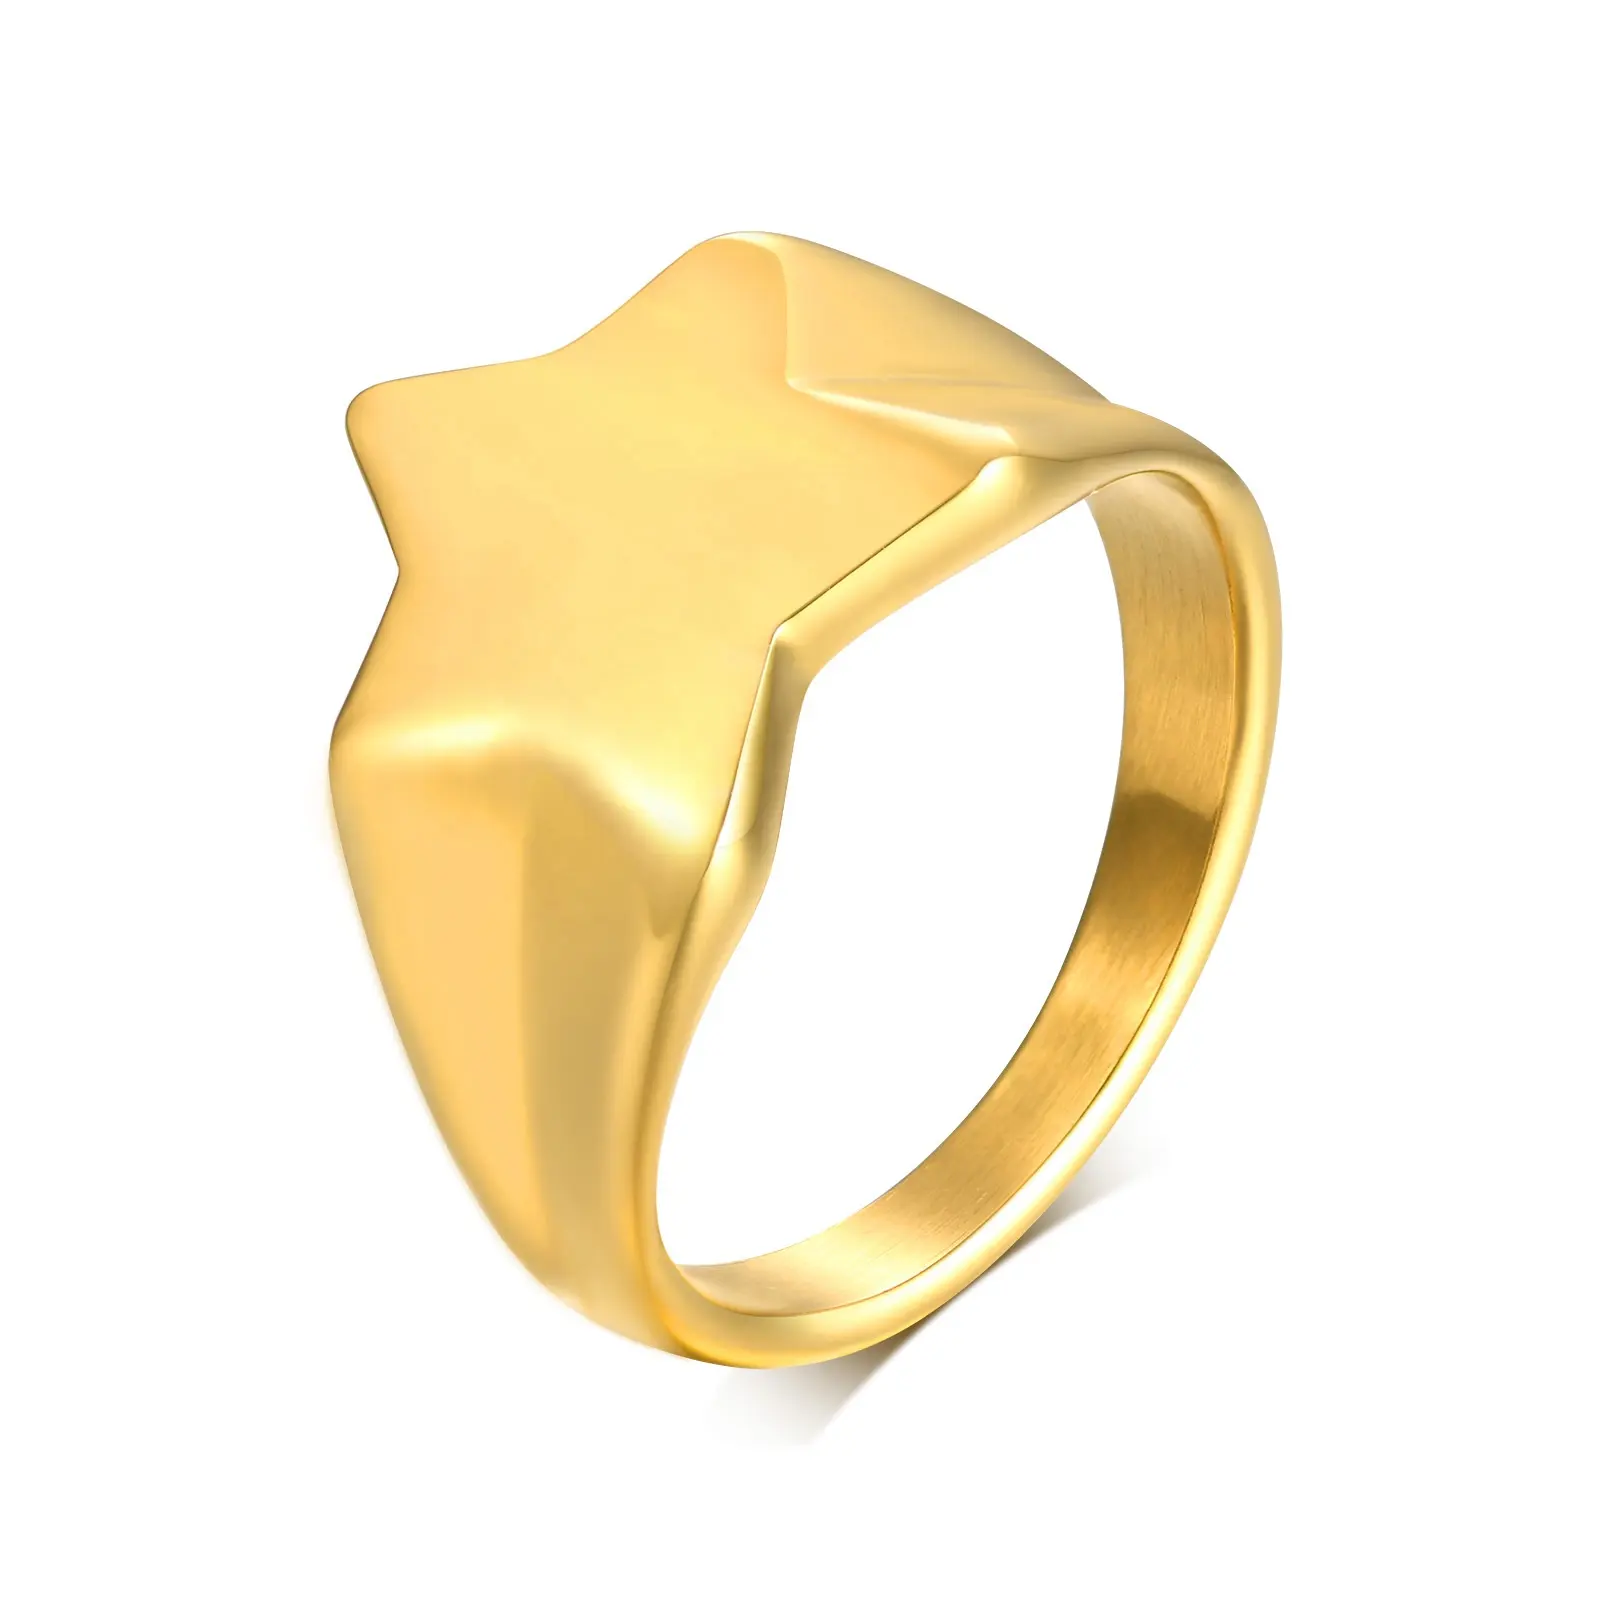 6-9 USA Size Wholesale Jewelry Women Plated 18K Gold 316L Stainless Steel Star Ring Lady